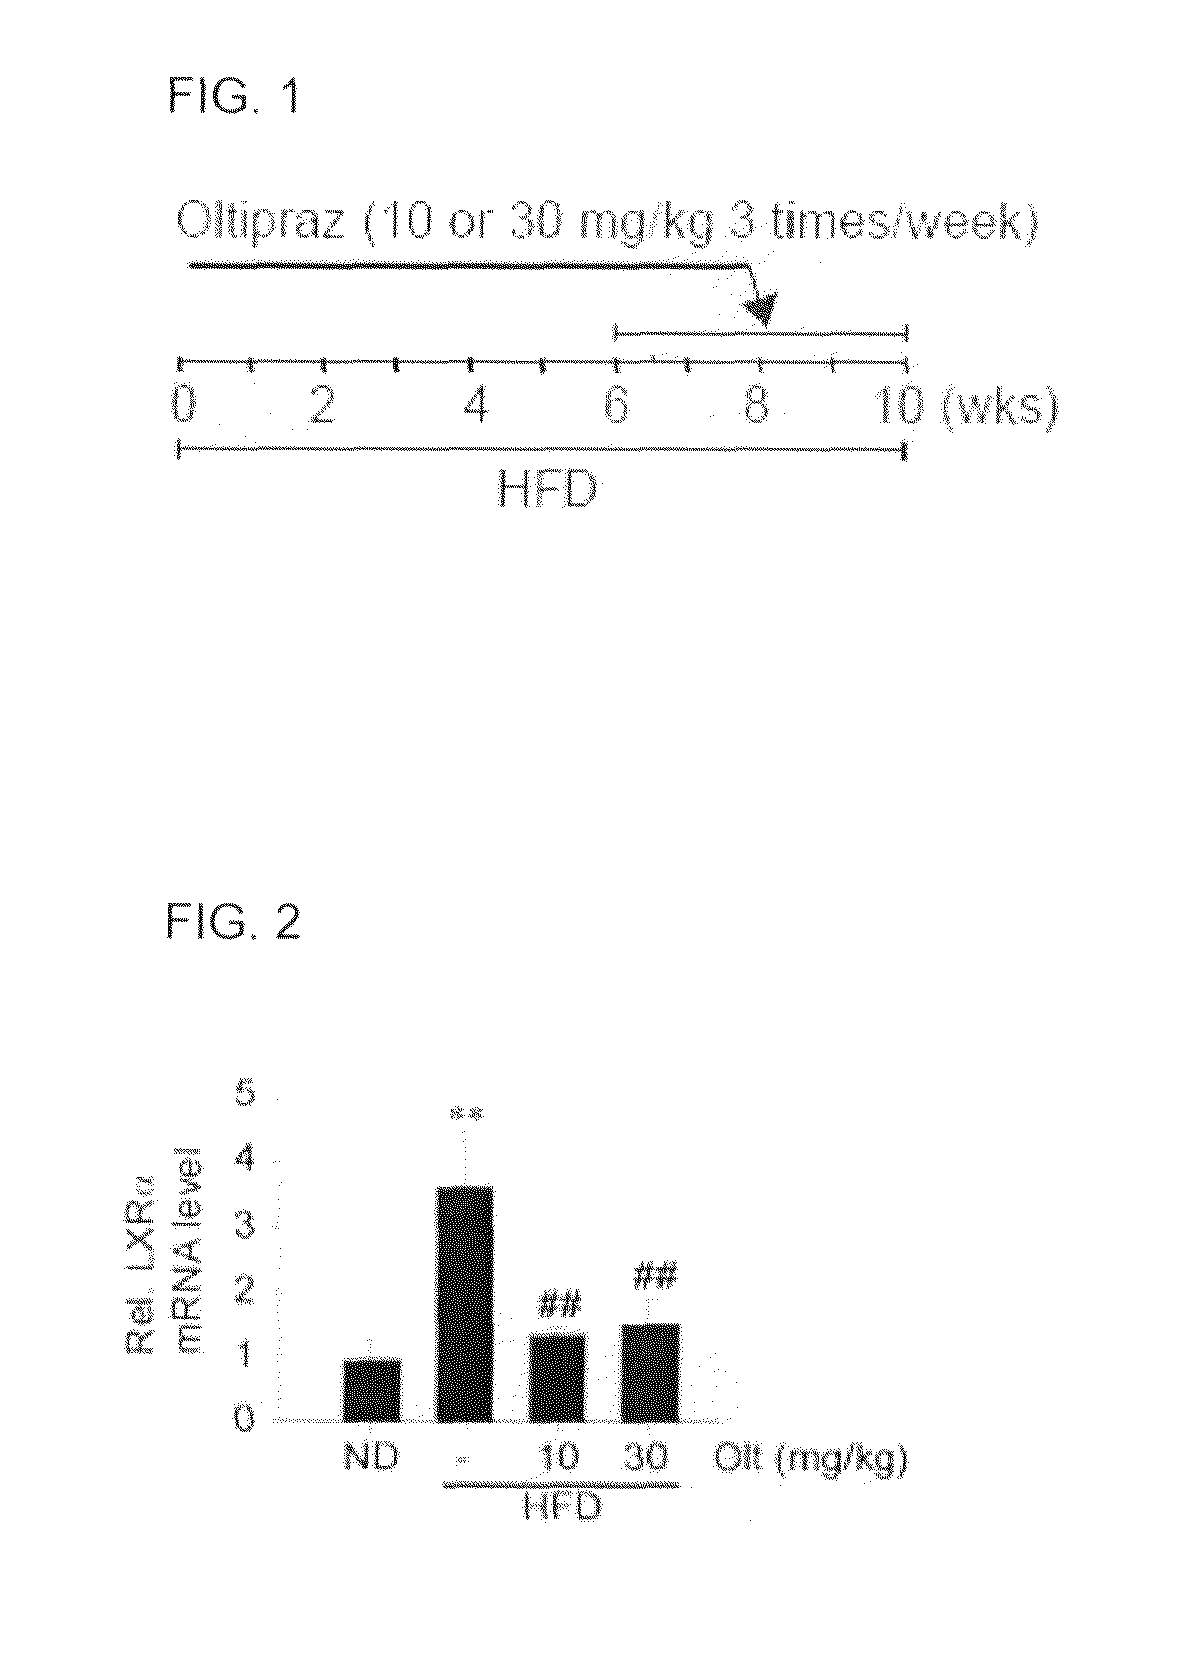 Pharmaceutical composition containing 1,2-dithiolthione derivative for preventing or treating disease caused by overexpression of LXR-α